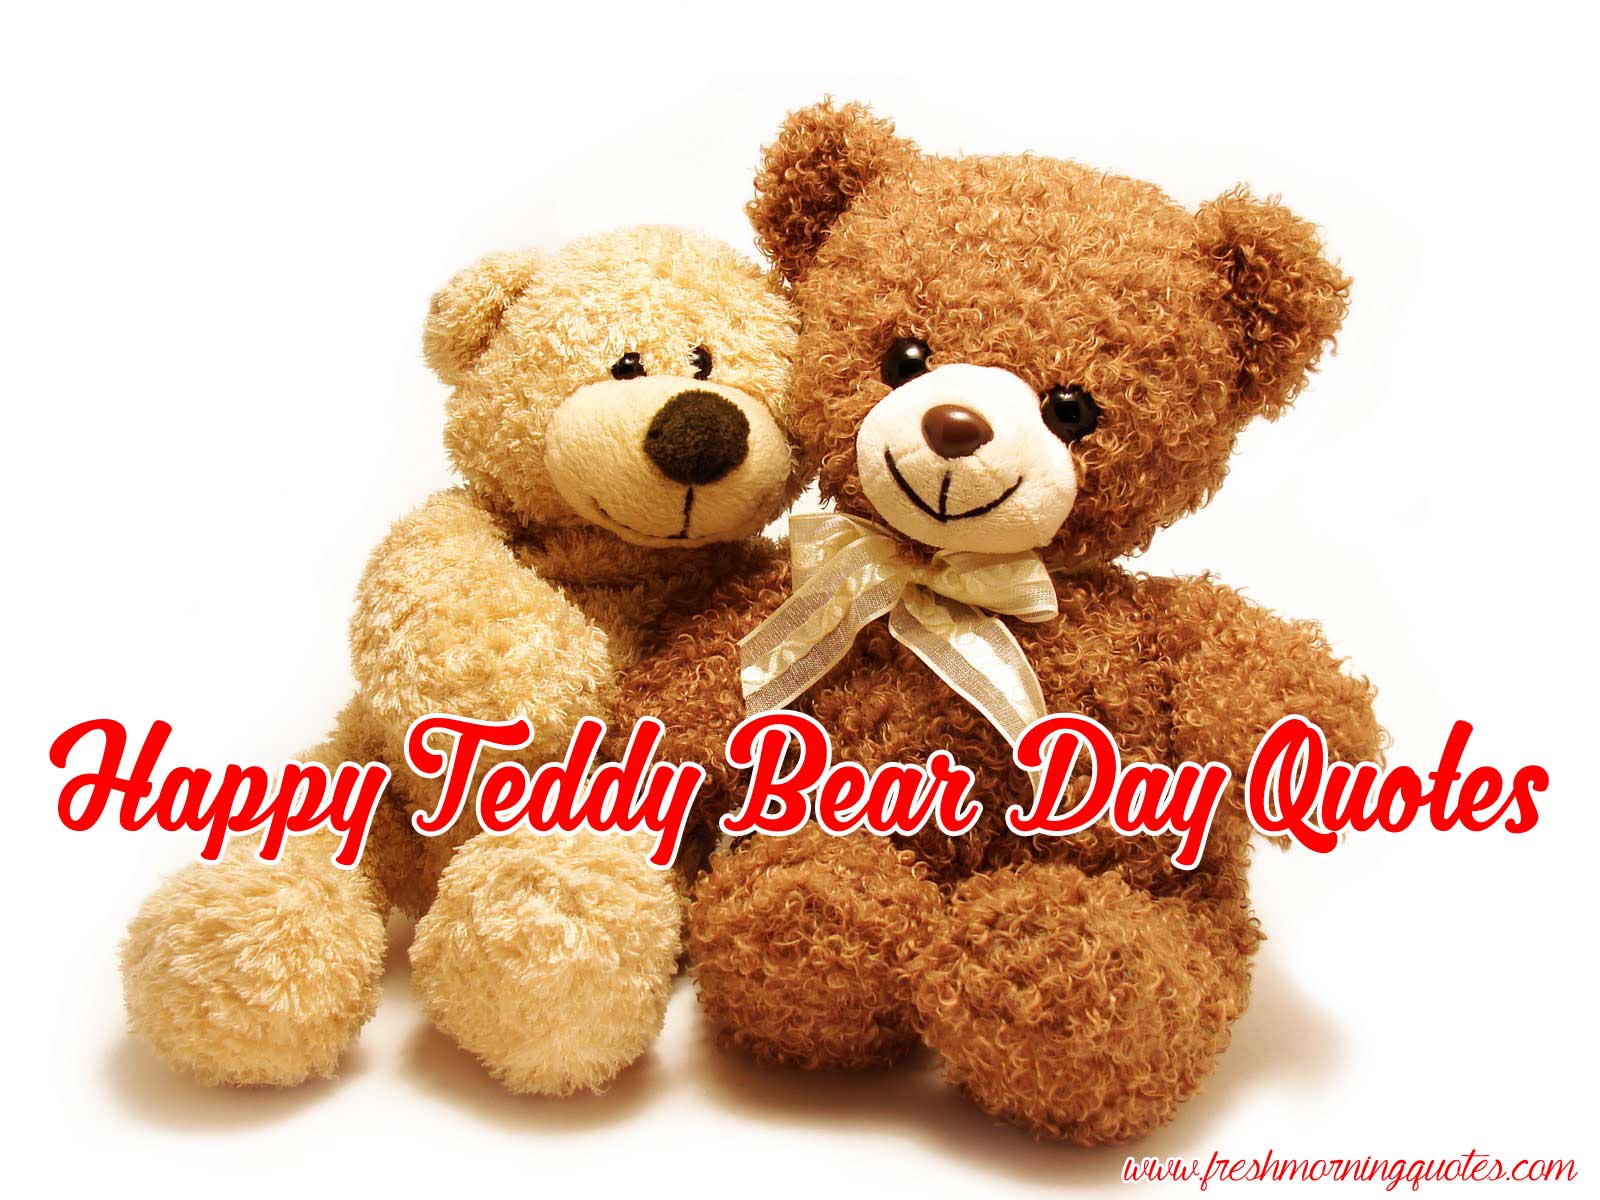 Teddy Bear Day 2018 Quotes Sayings and Image